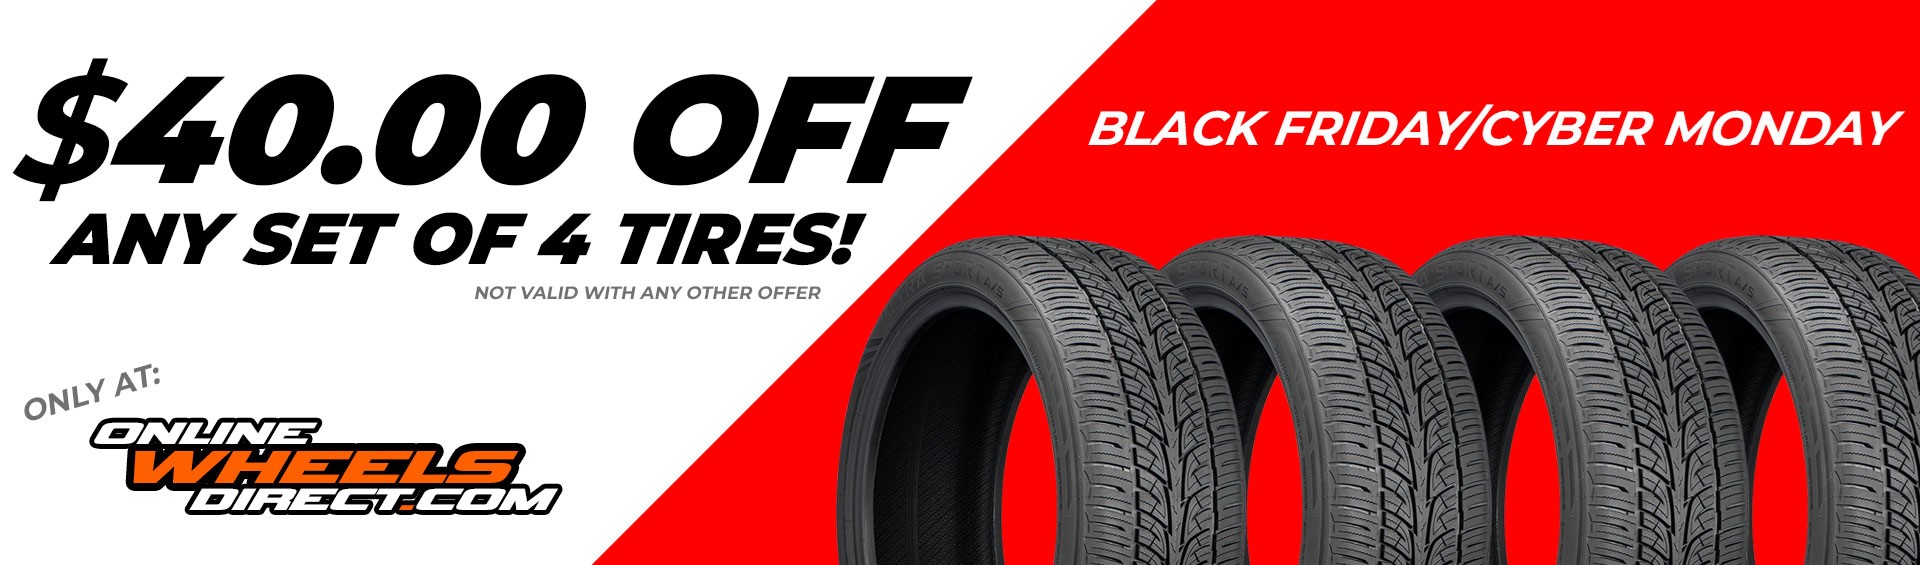 GET $40 OFF ON A SET OF 4 ON ALL TIRES ON STOCK!